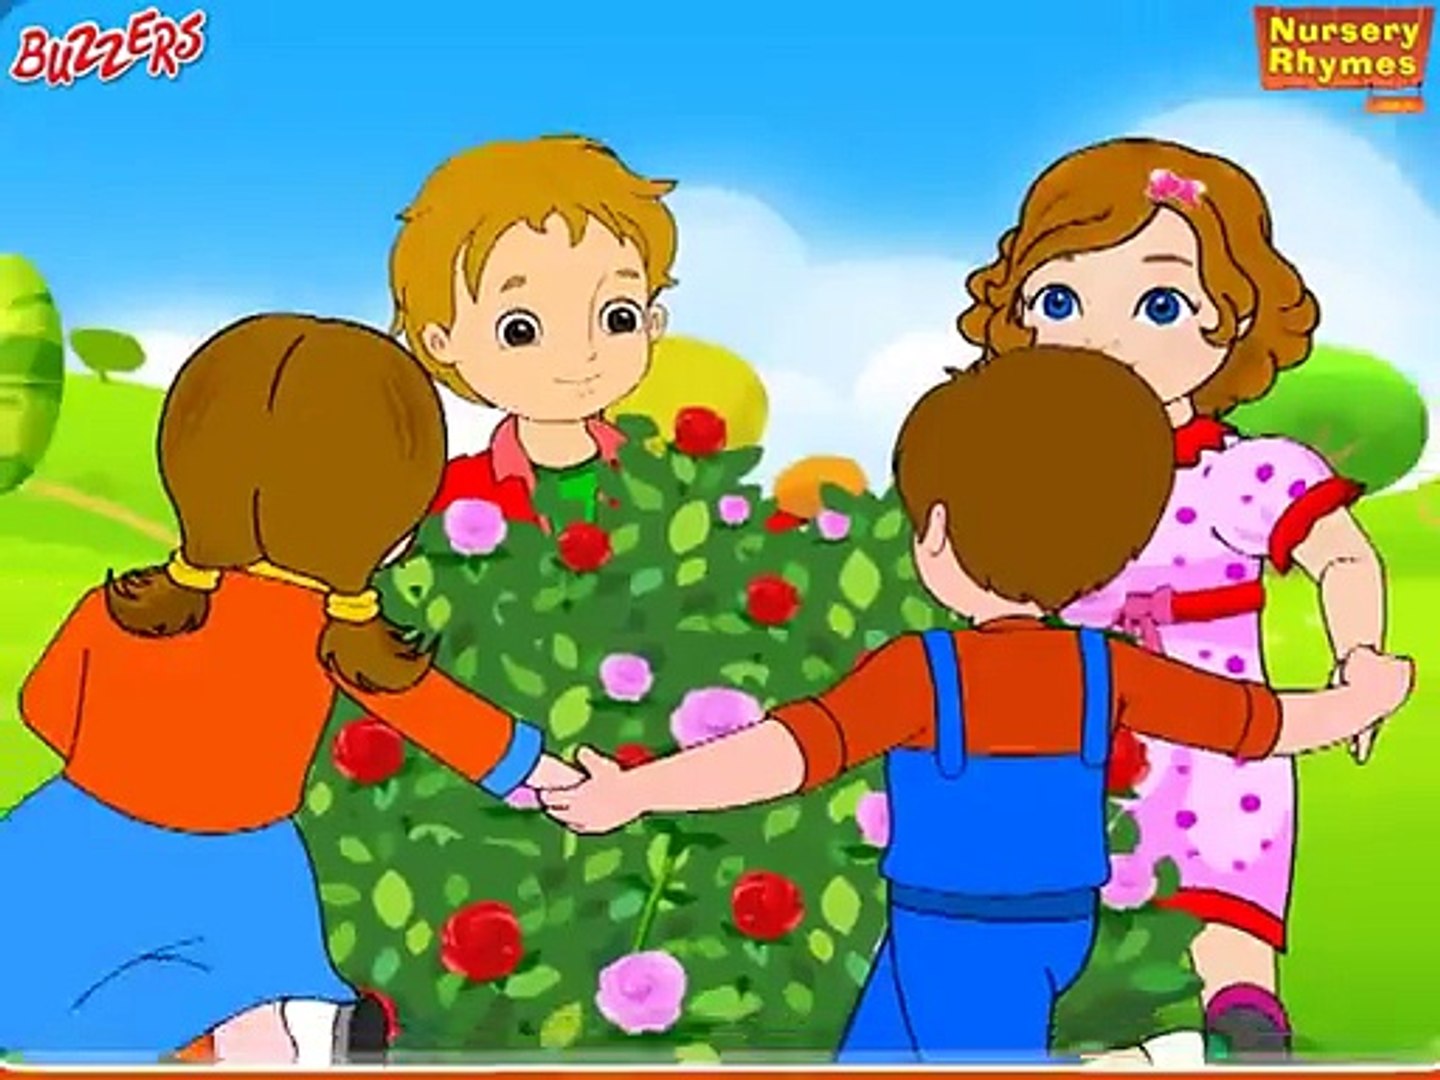 Ring A Ring O Roses Nursery Rhymes For Kids Buzzers Video Dailymotion